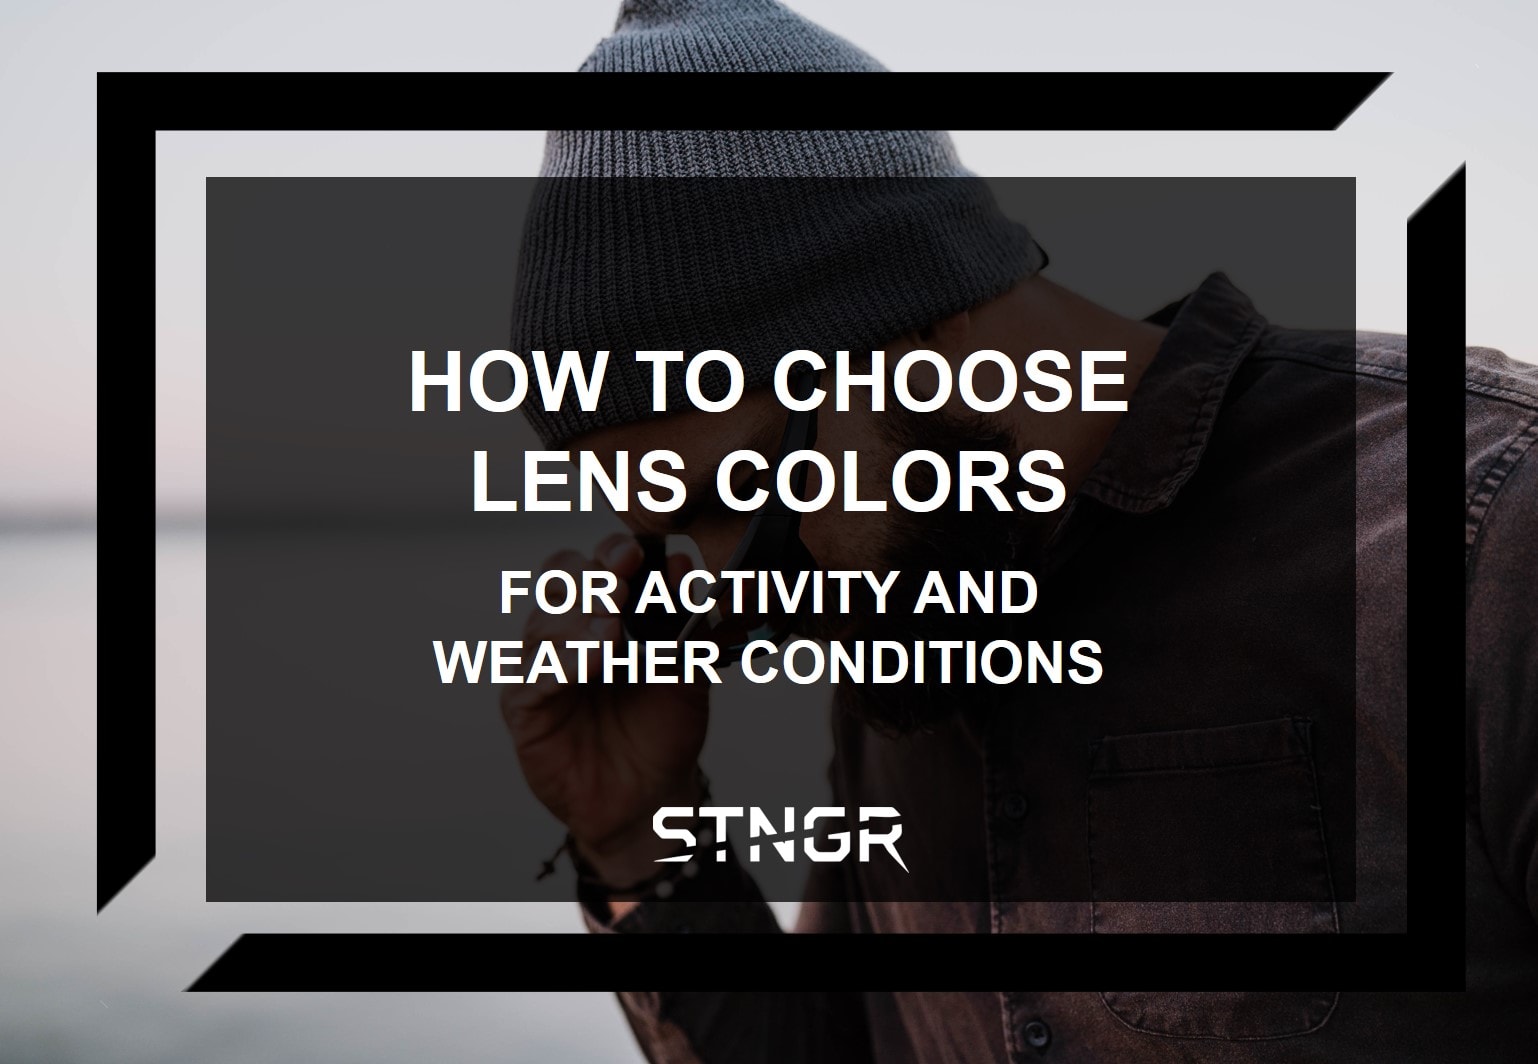 How to Choose Lens Colors for Activity and Weather Conditions